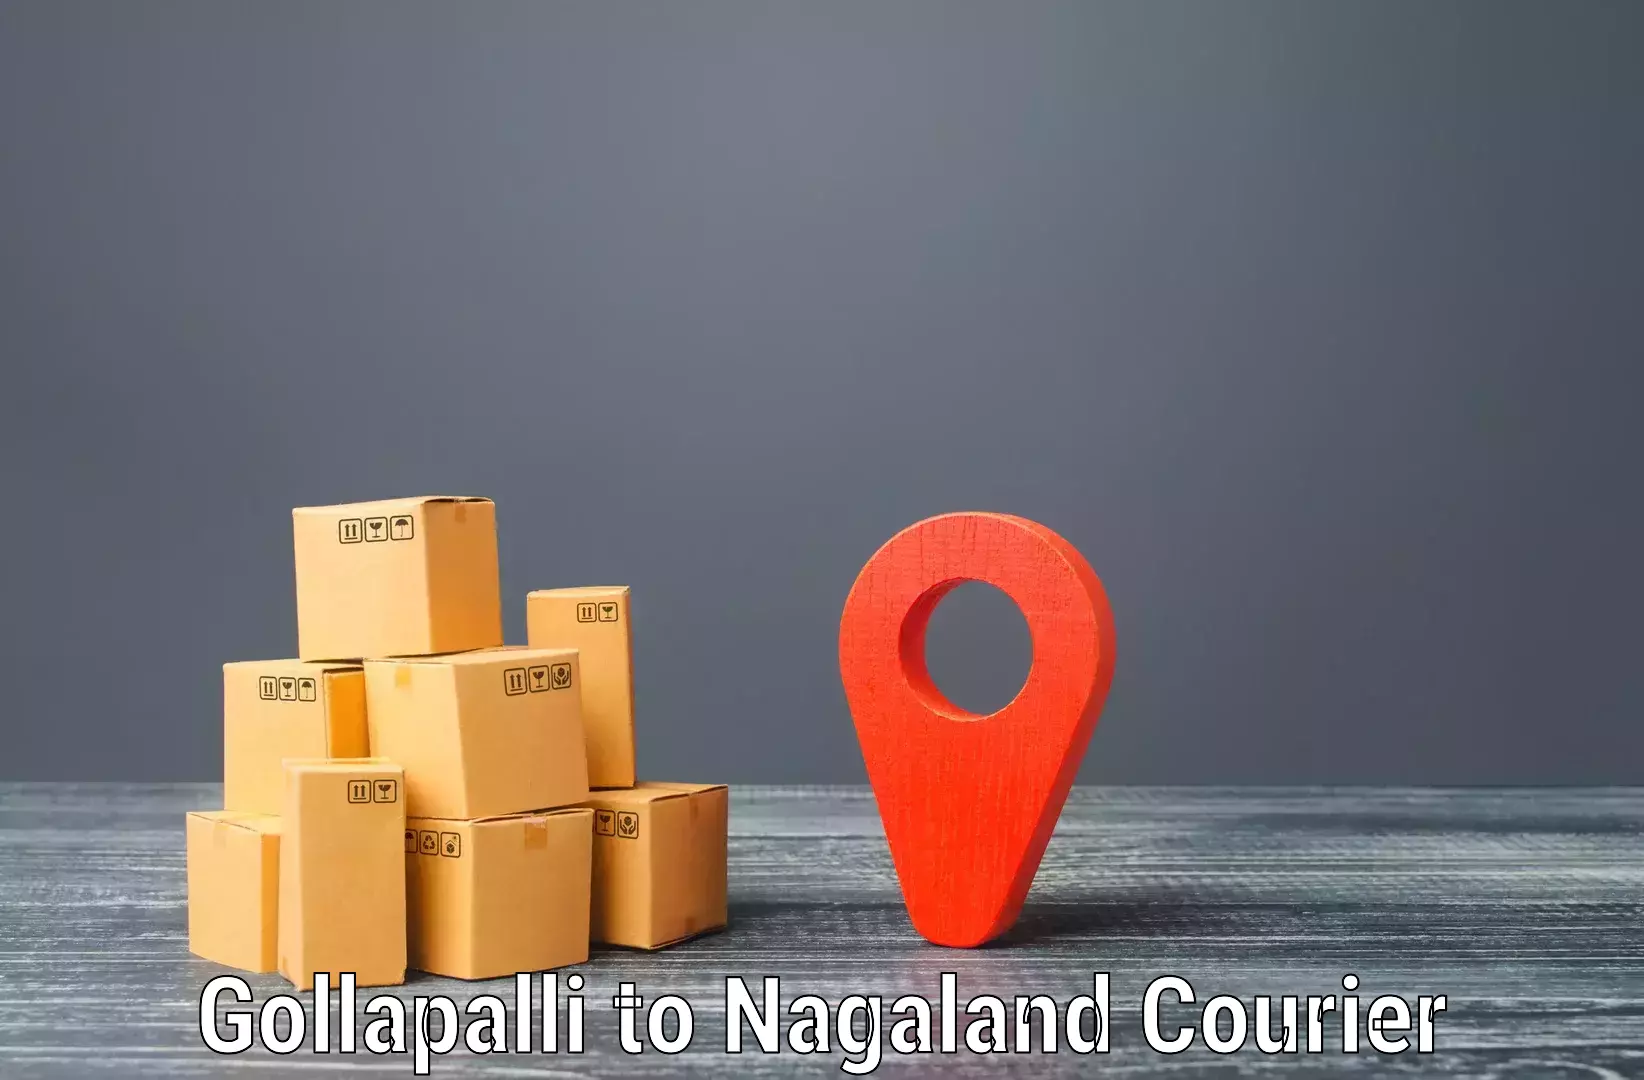 Affordable parcel service Gollapalli to Nagaland